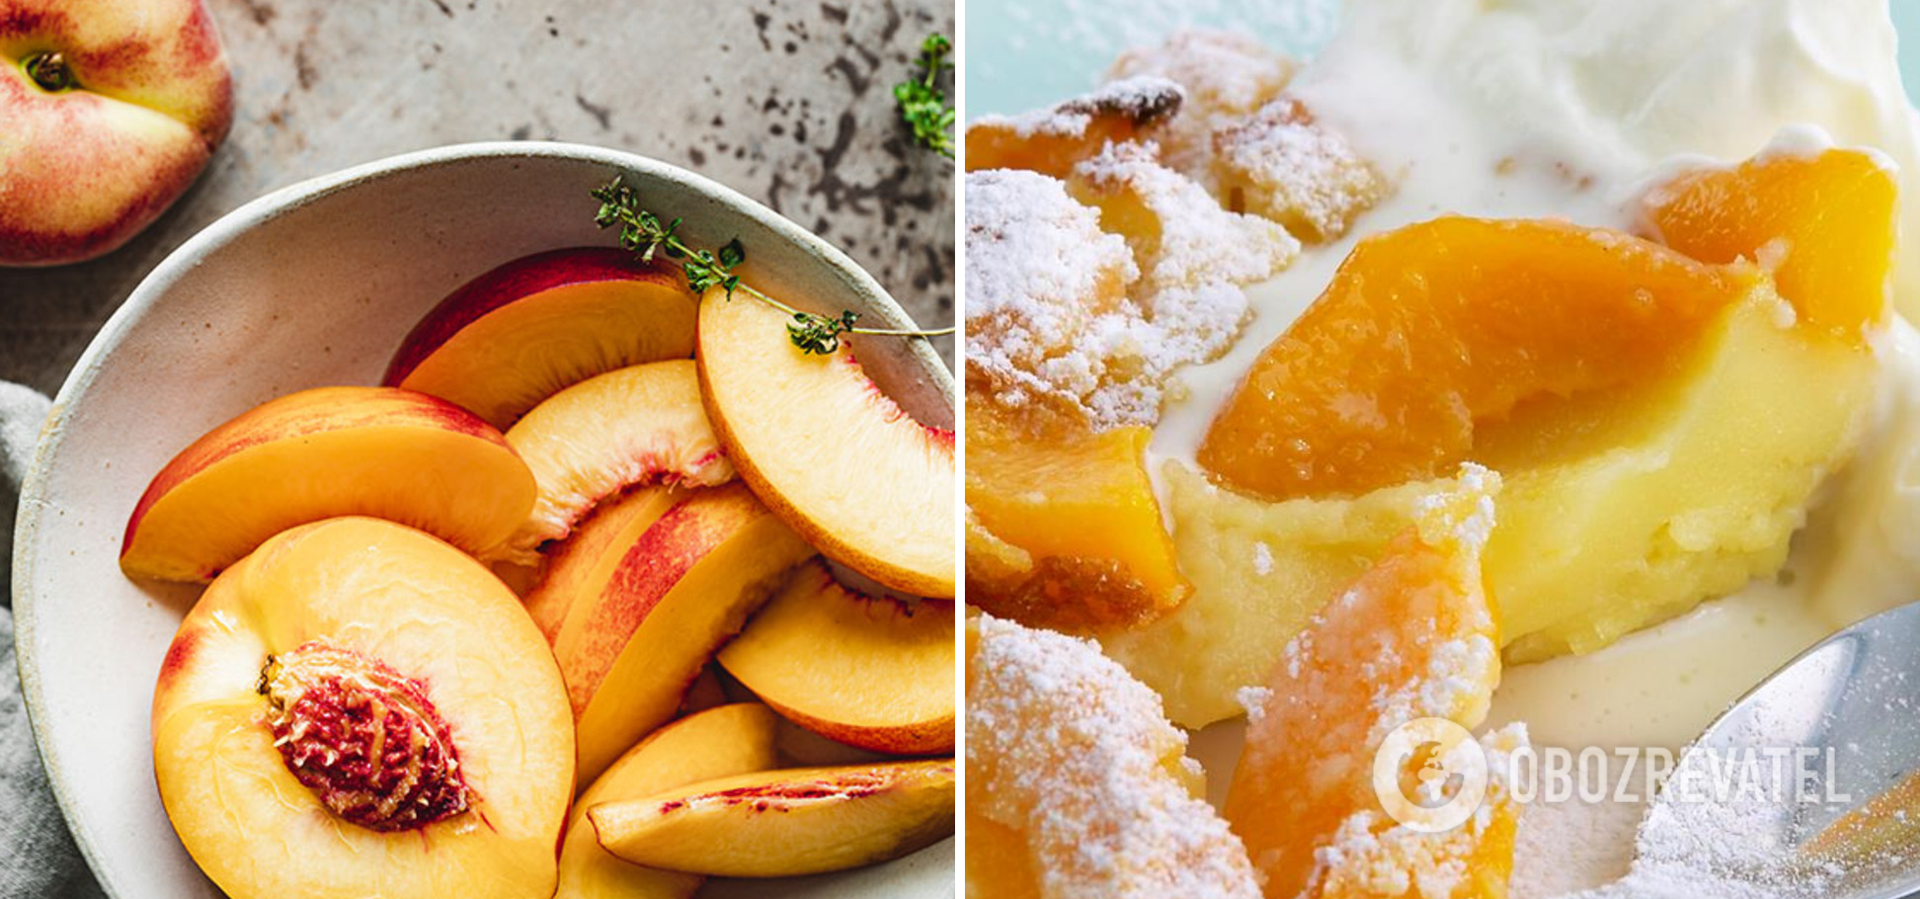 Crispy biscuit for tea with juicy peaches: how to make a spectacular seasonal dessert